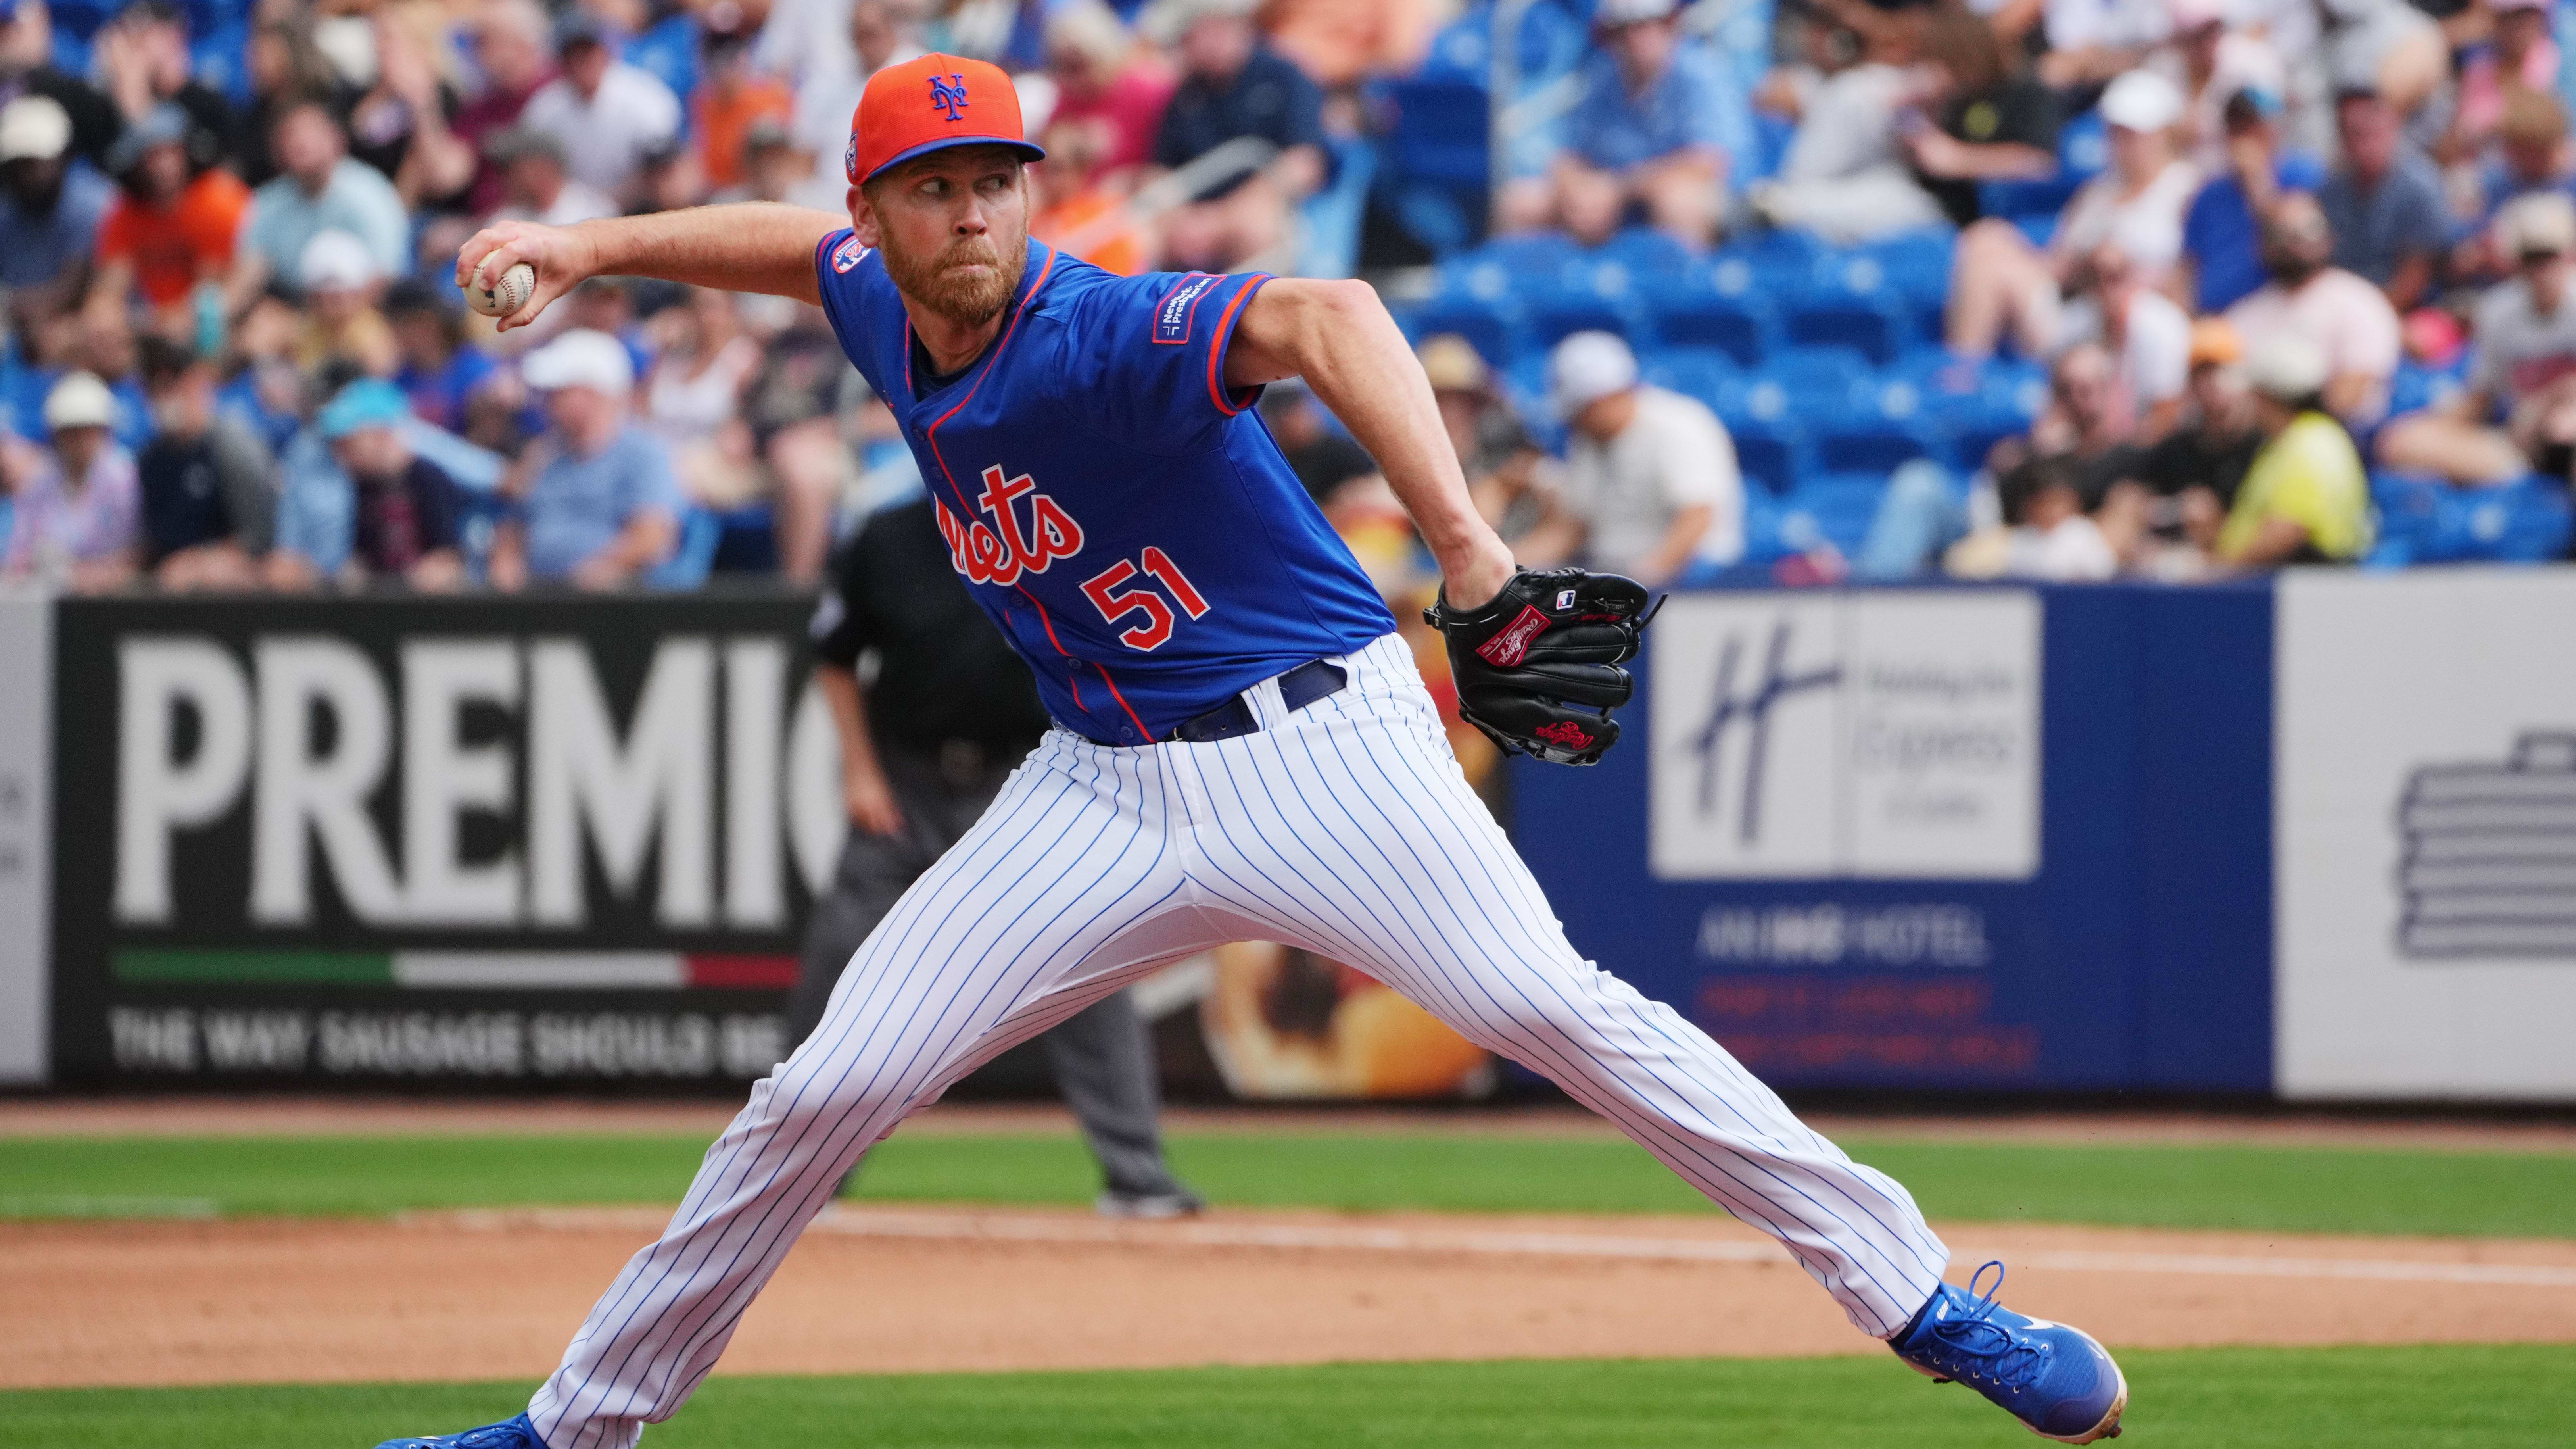 Ex-Mets Hurler Lands With Yankees After Surprising Stint With Club